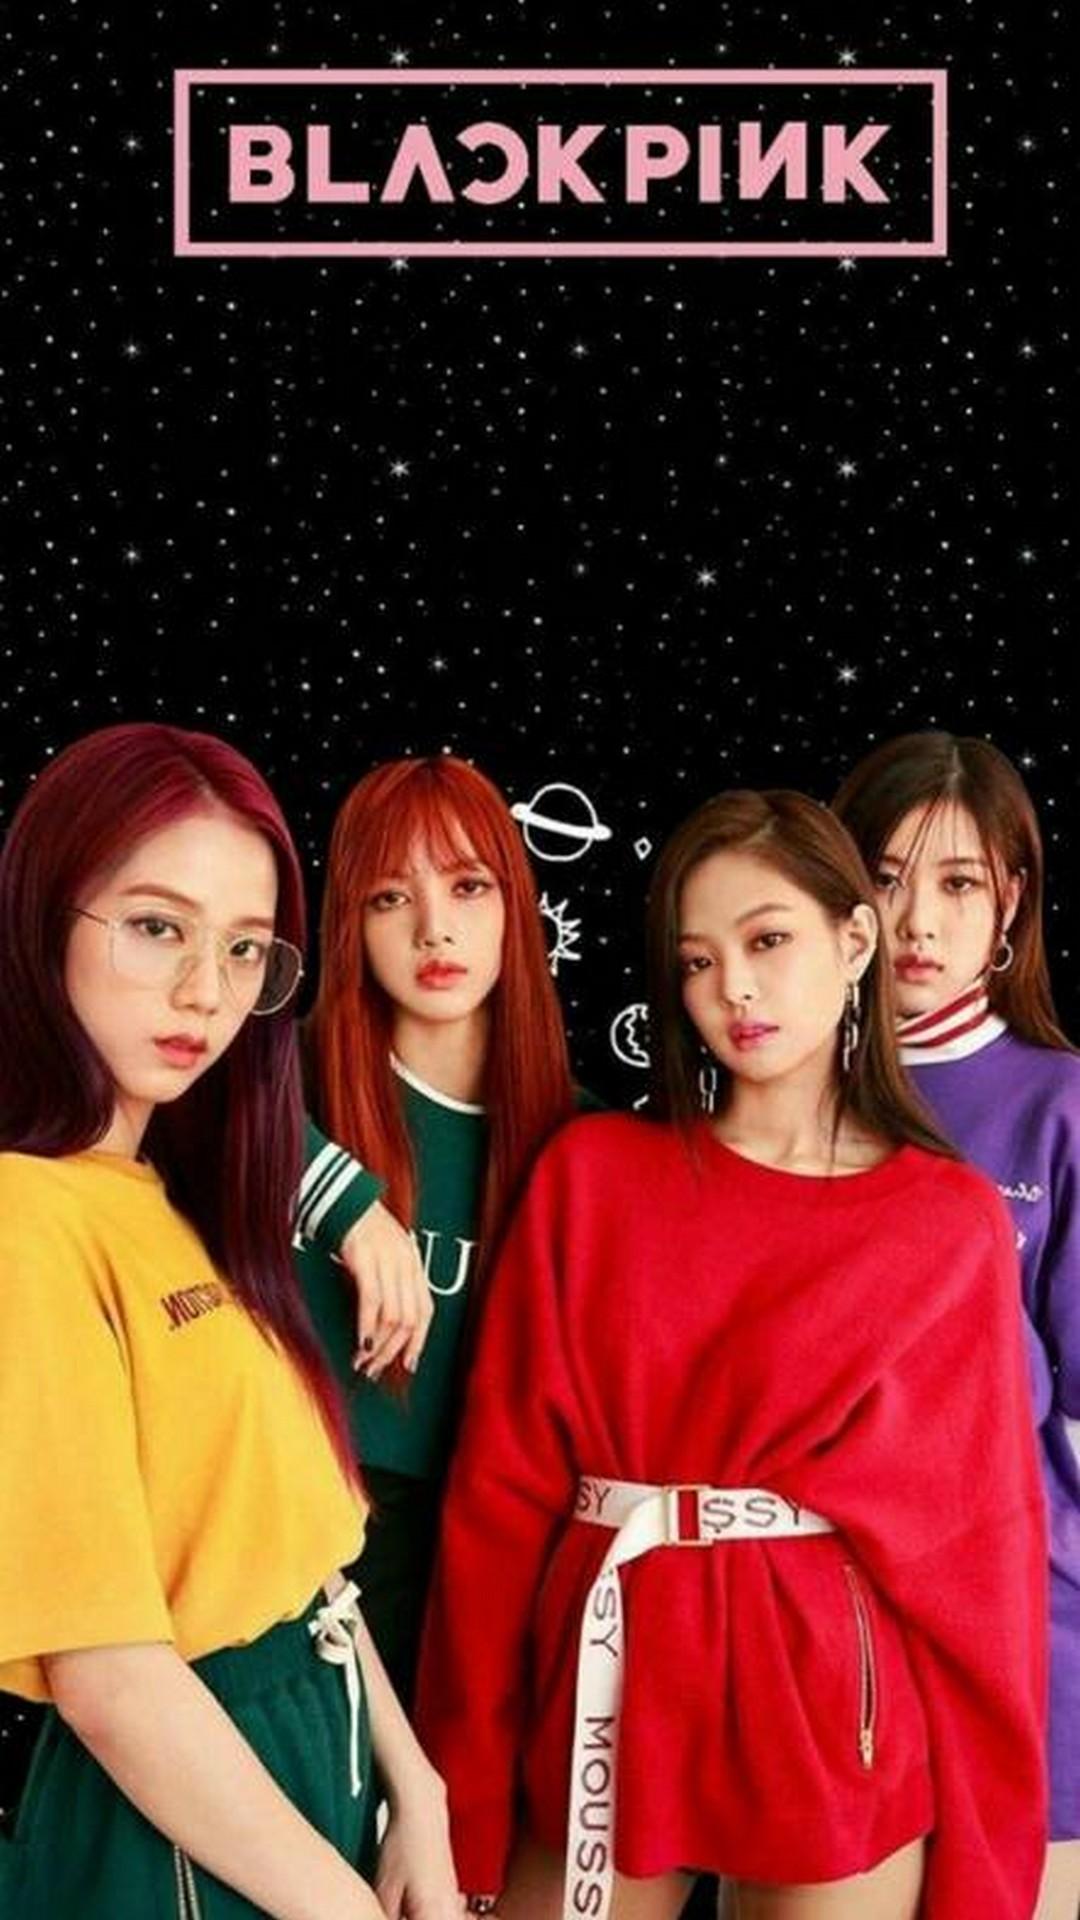 Blackpink Wallpaper Android Android Wallpaper